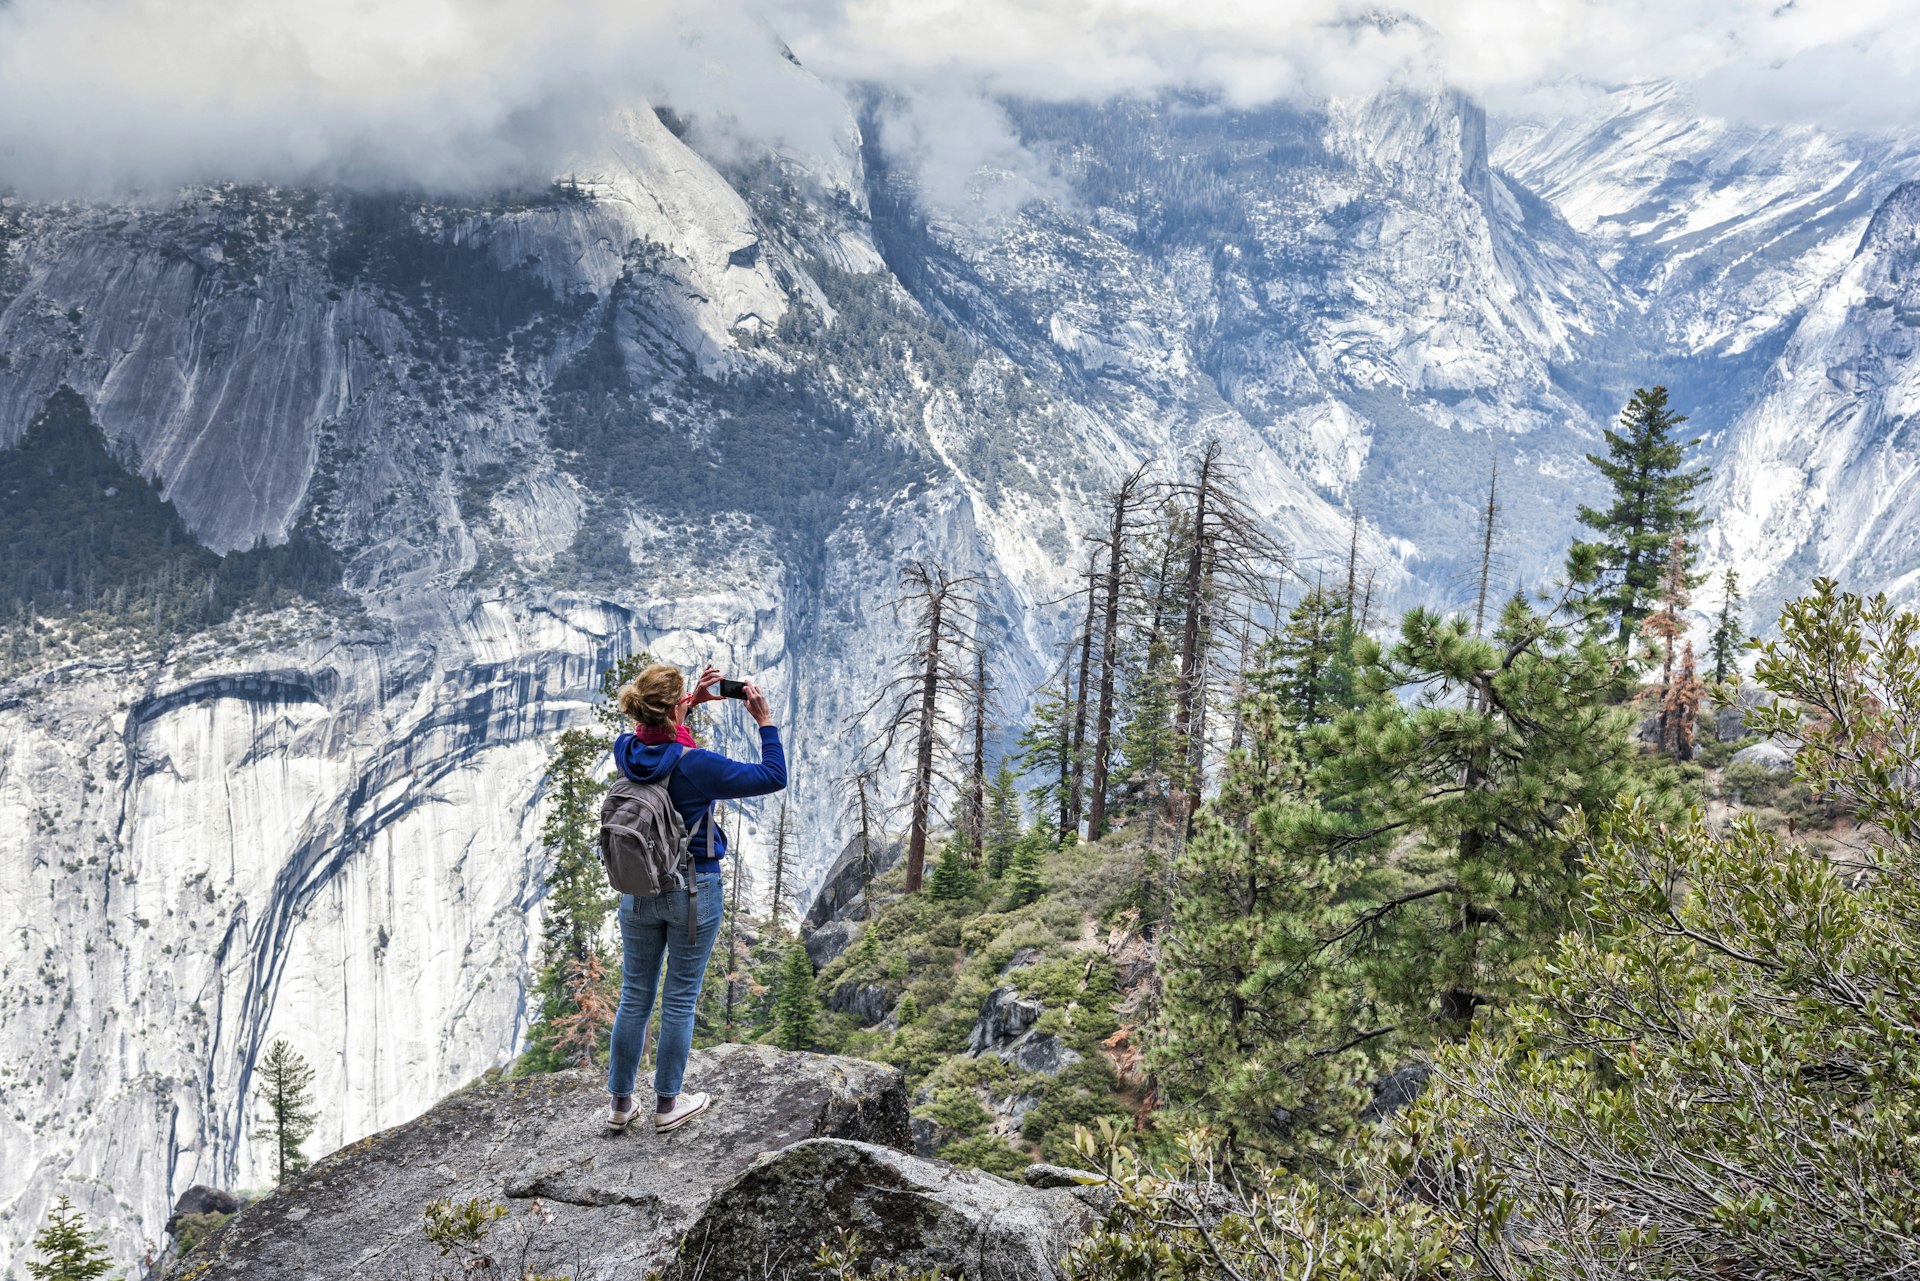 A woman wearing a backpack taking photo in Yosemite